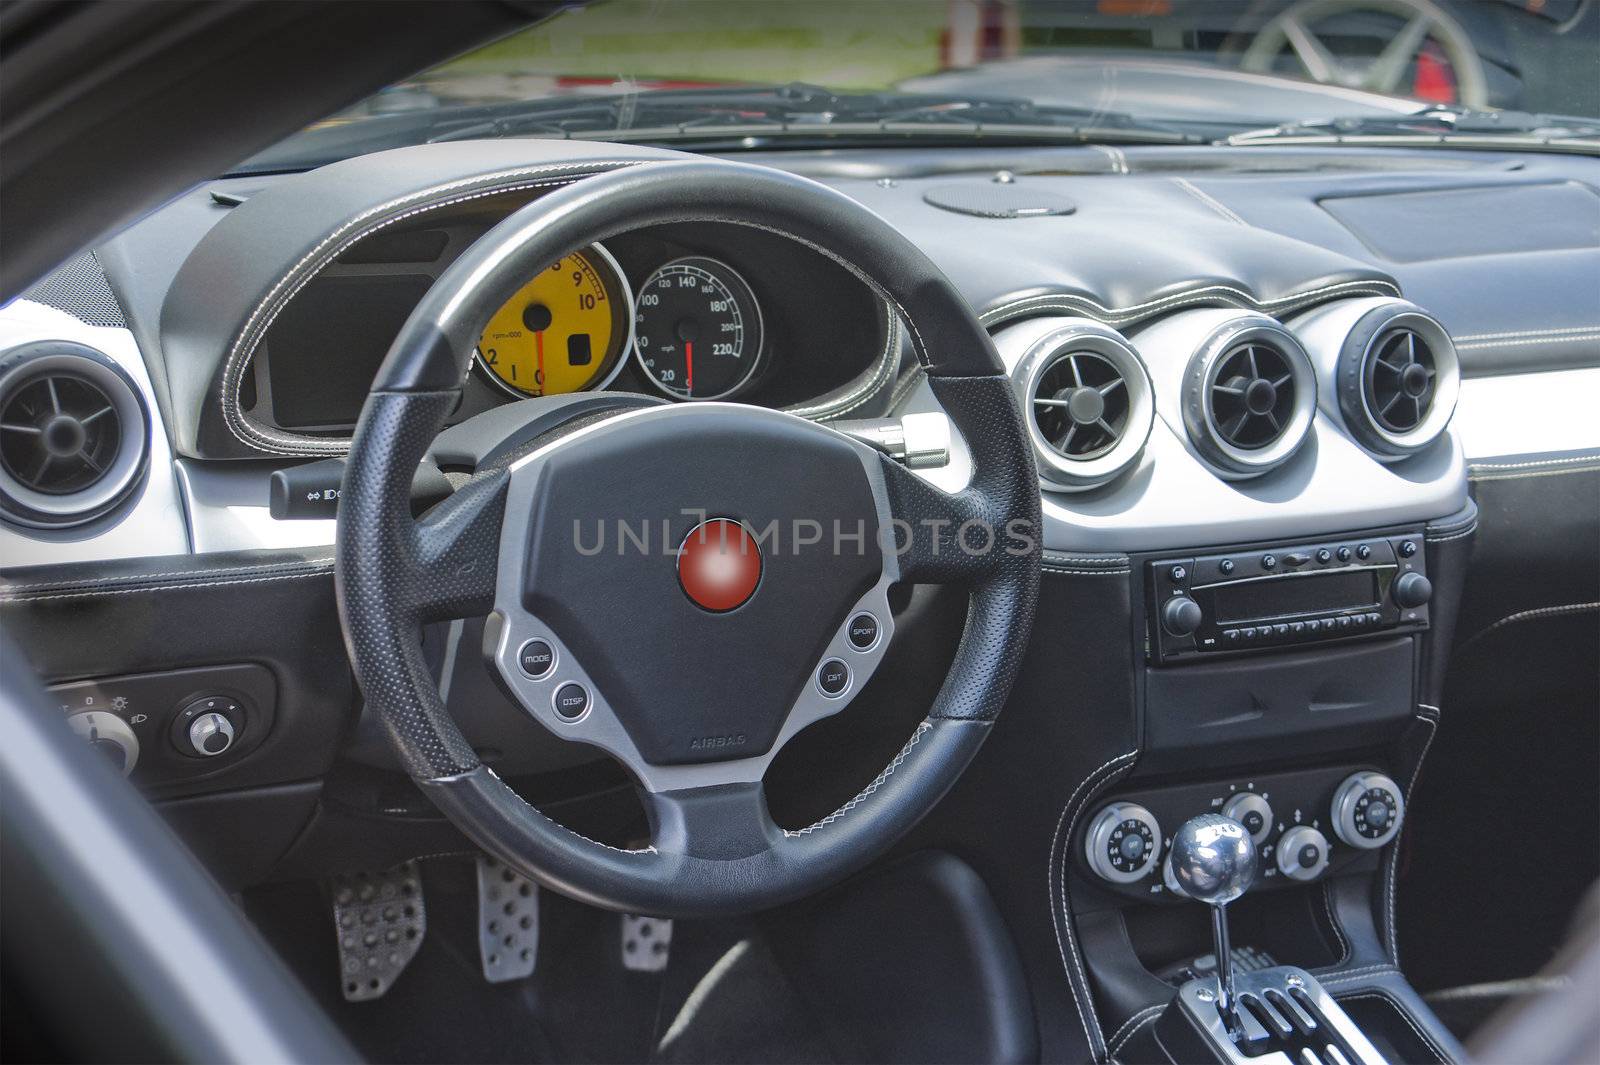 Sports car interior in gray leather and carbon fiber